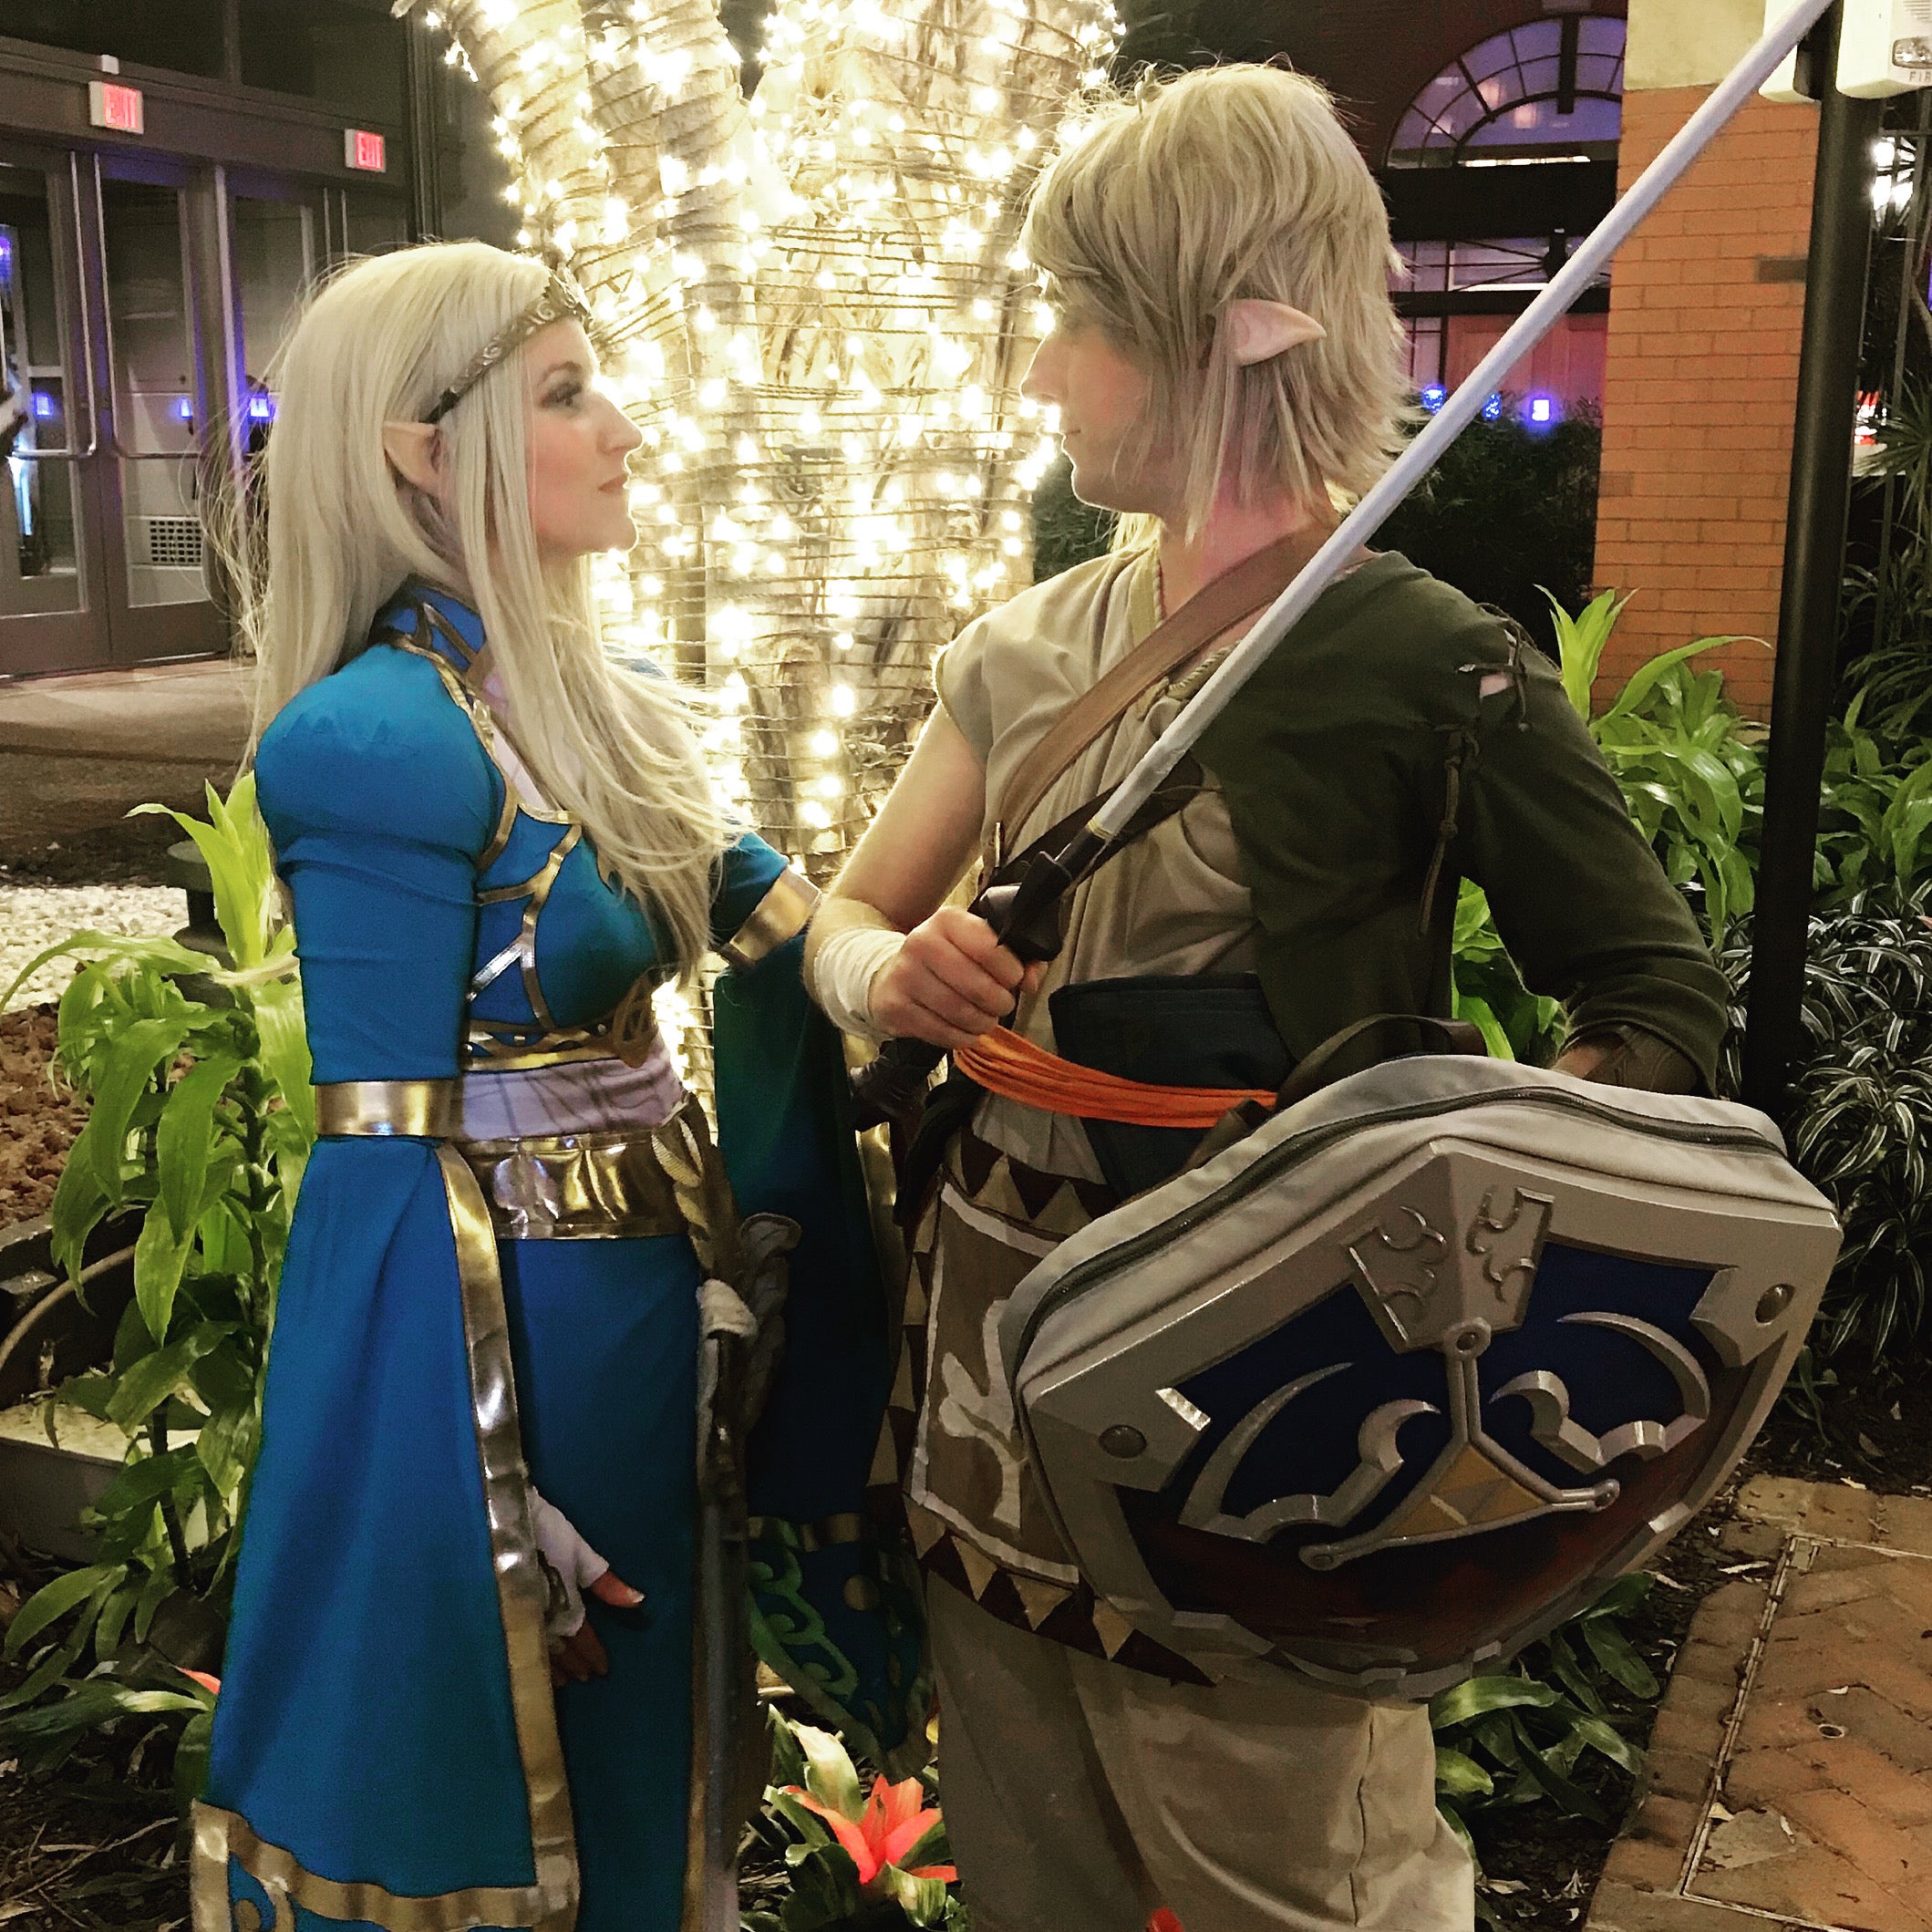 Sexual Harassment in the Cosplay Community